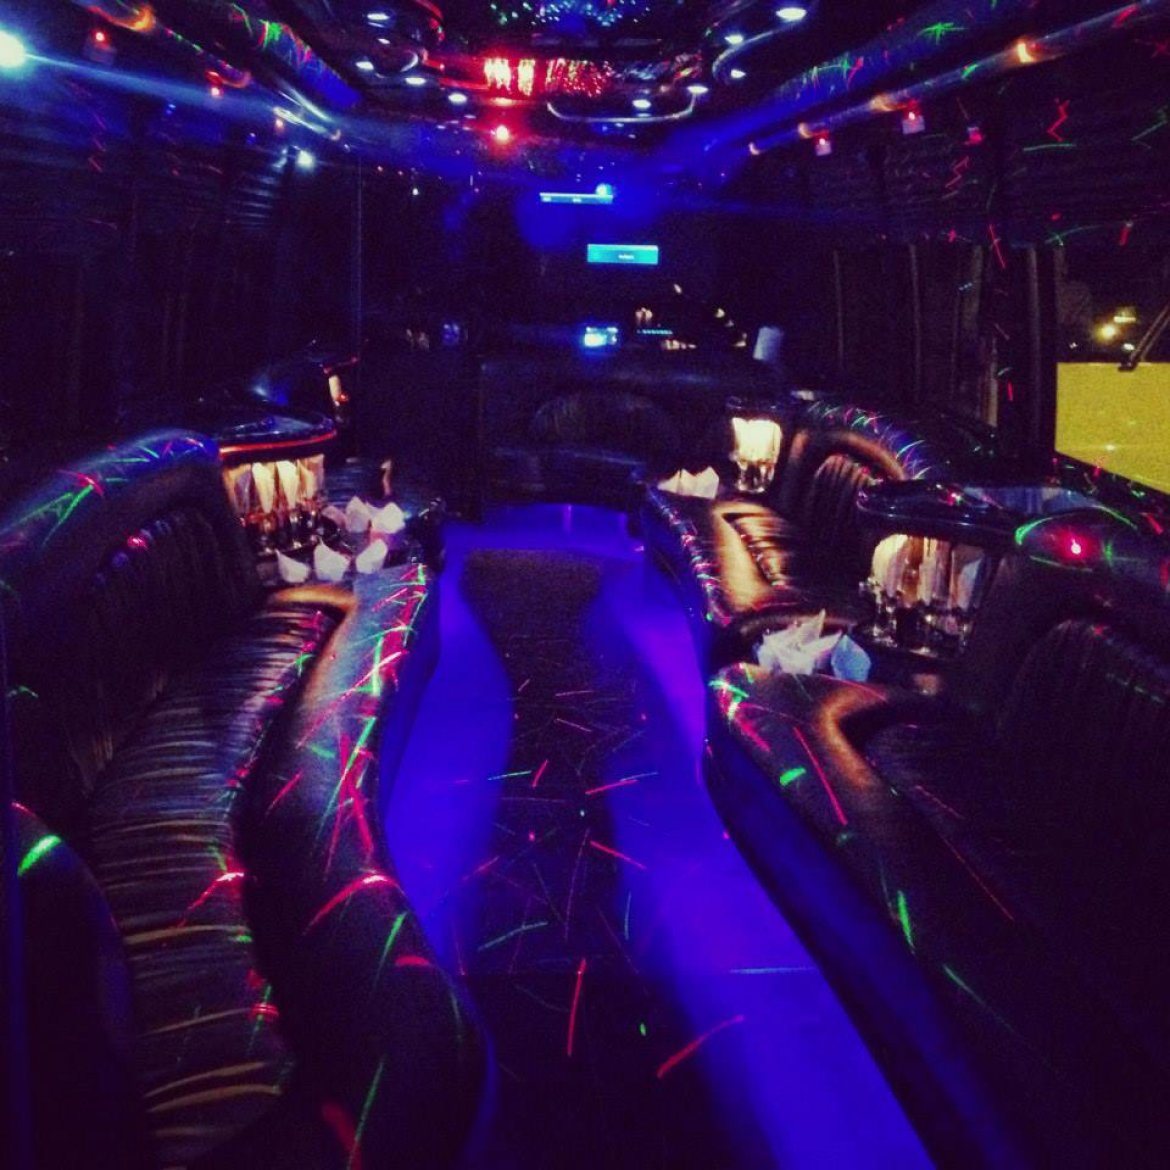 Limo Bus for sale: 2008 International 320 by Krystal